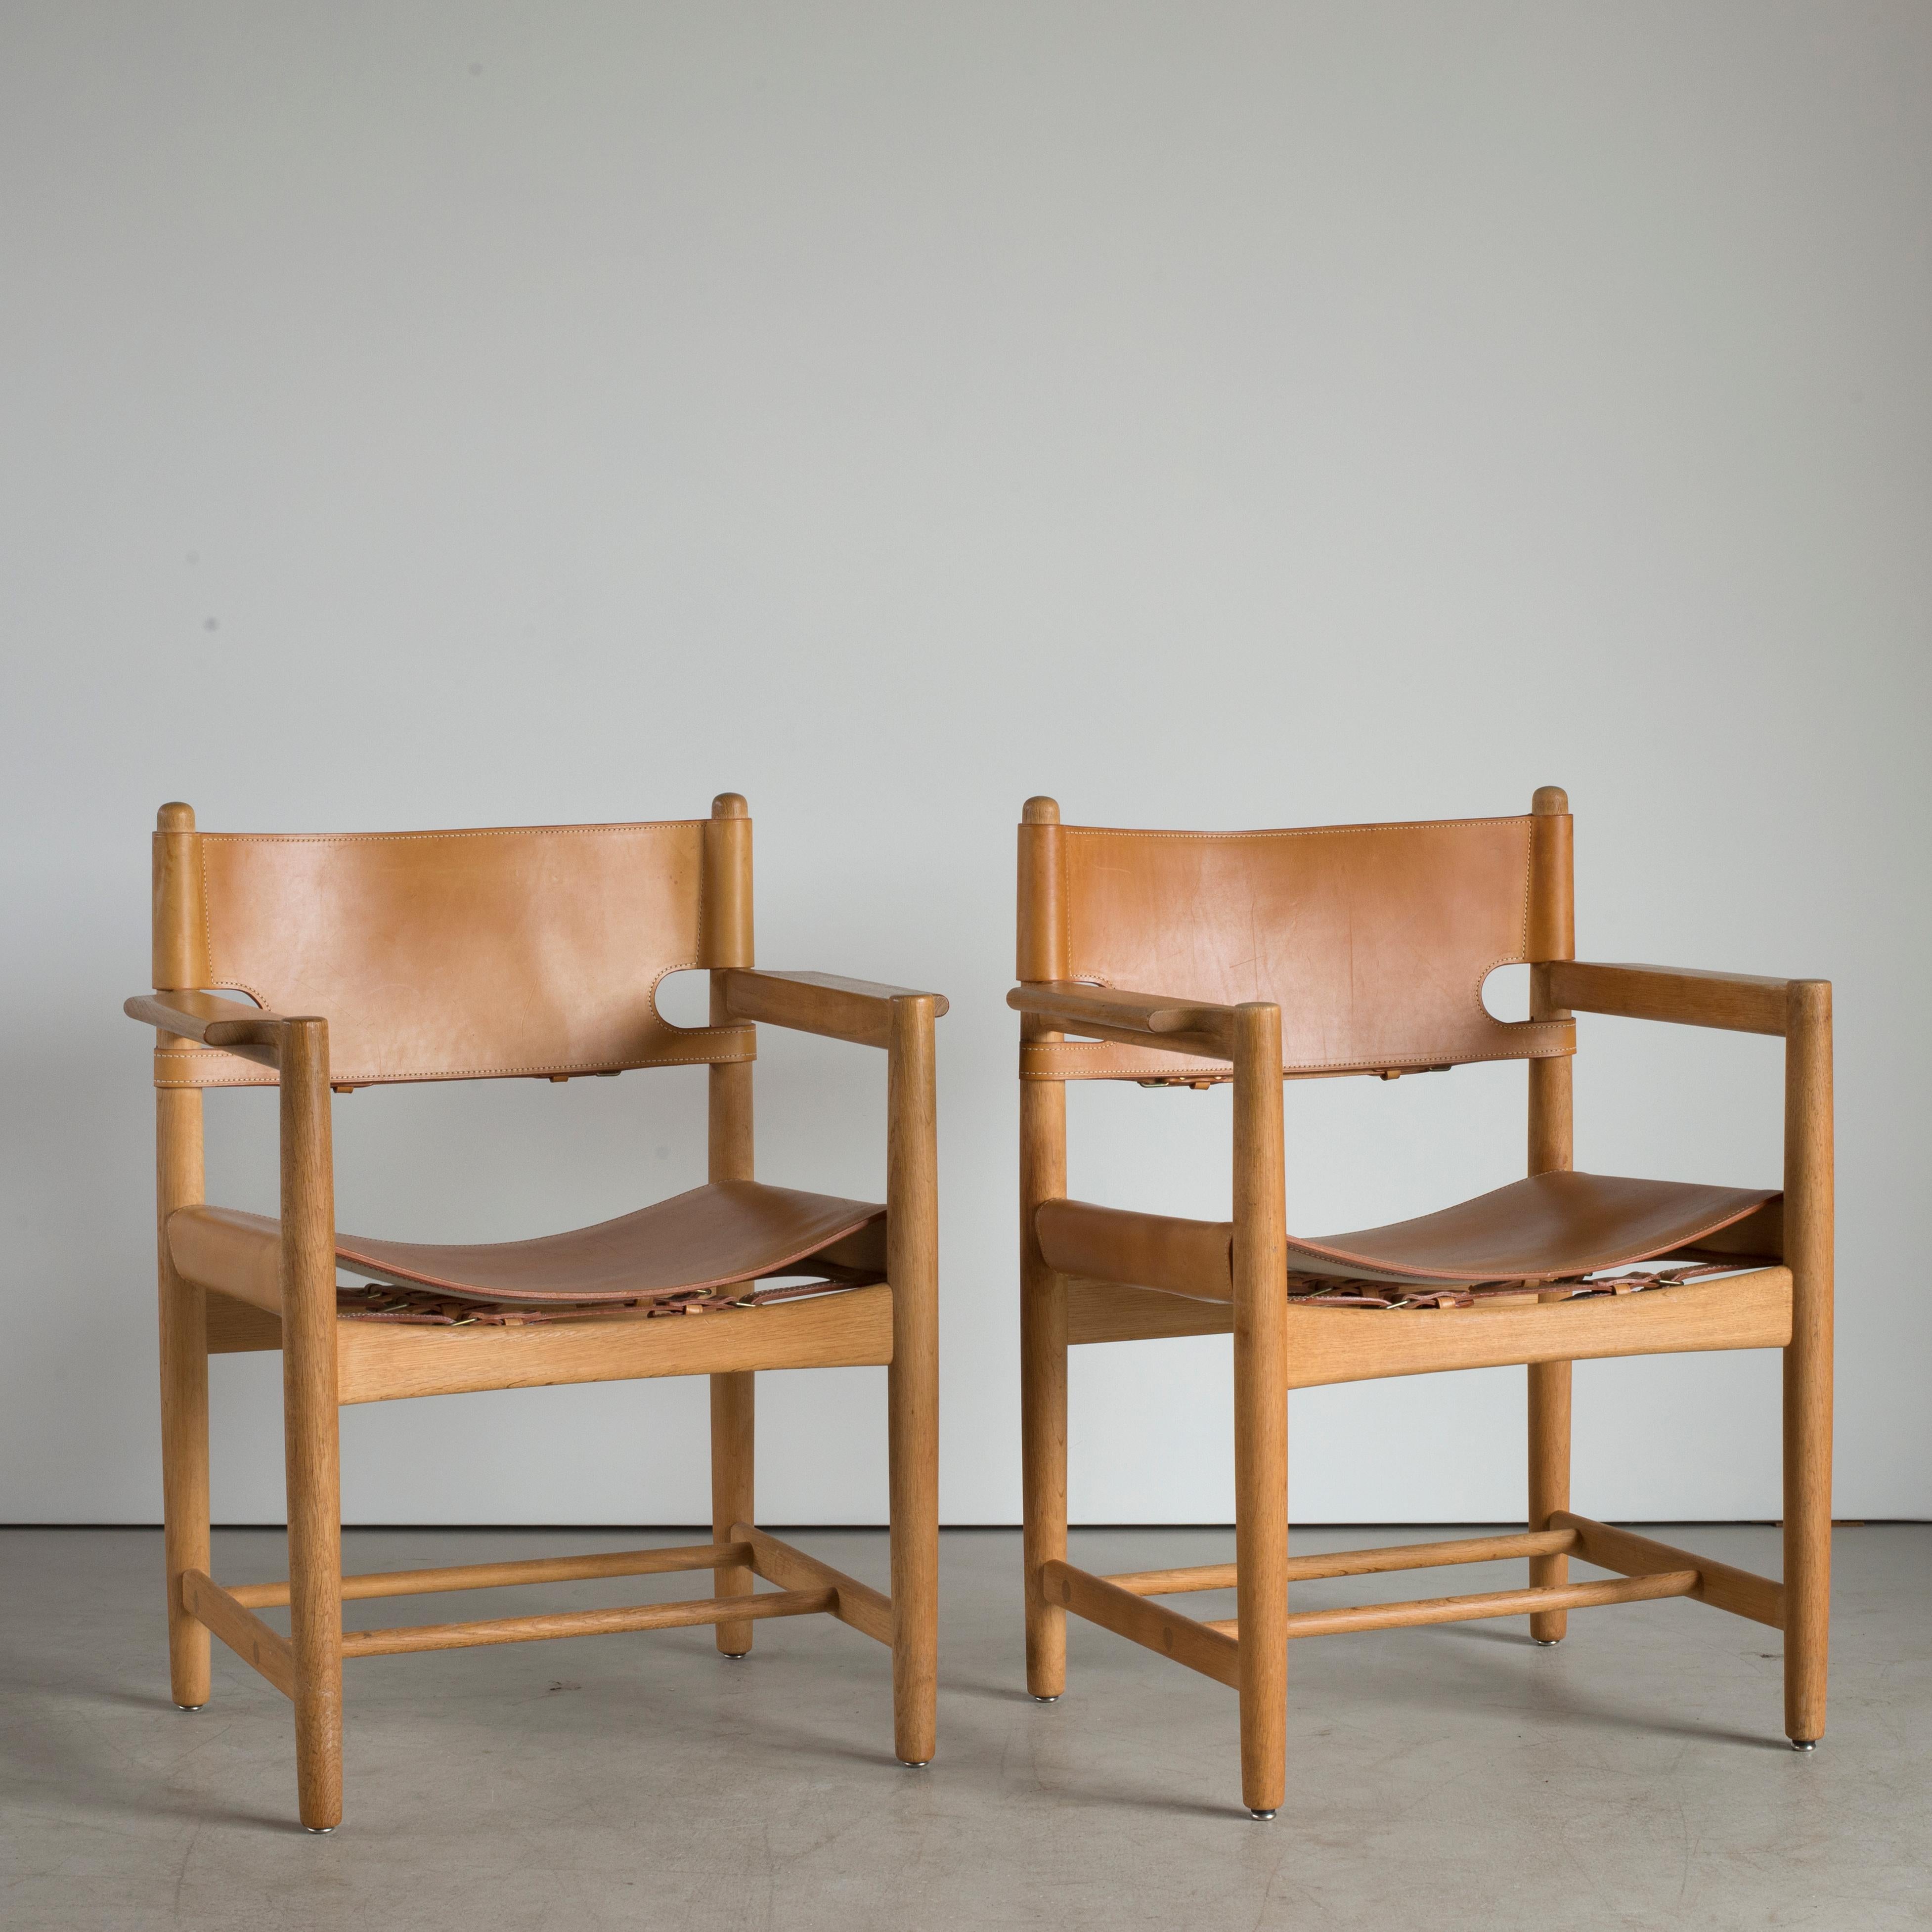 Børge Mogensen pair of armchairs in oak and natural leather. Executed by Fredericia Furniture.